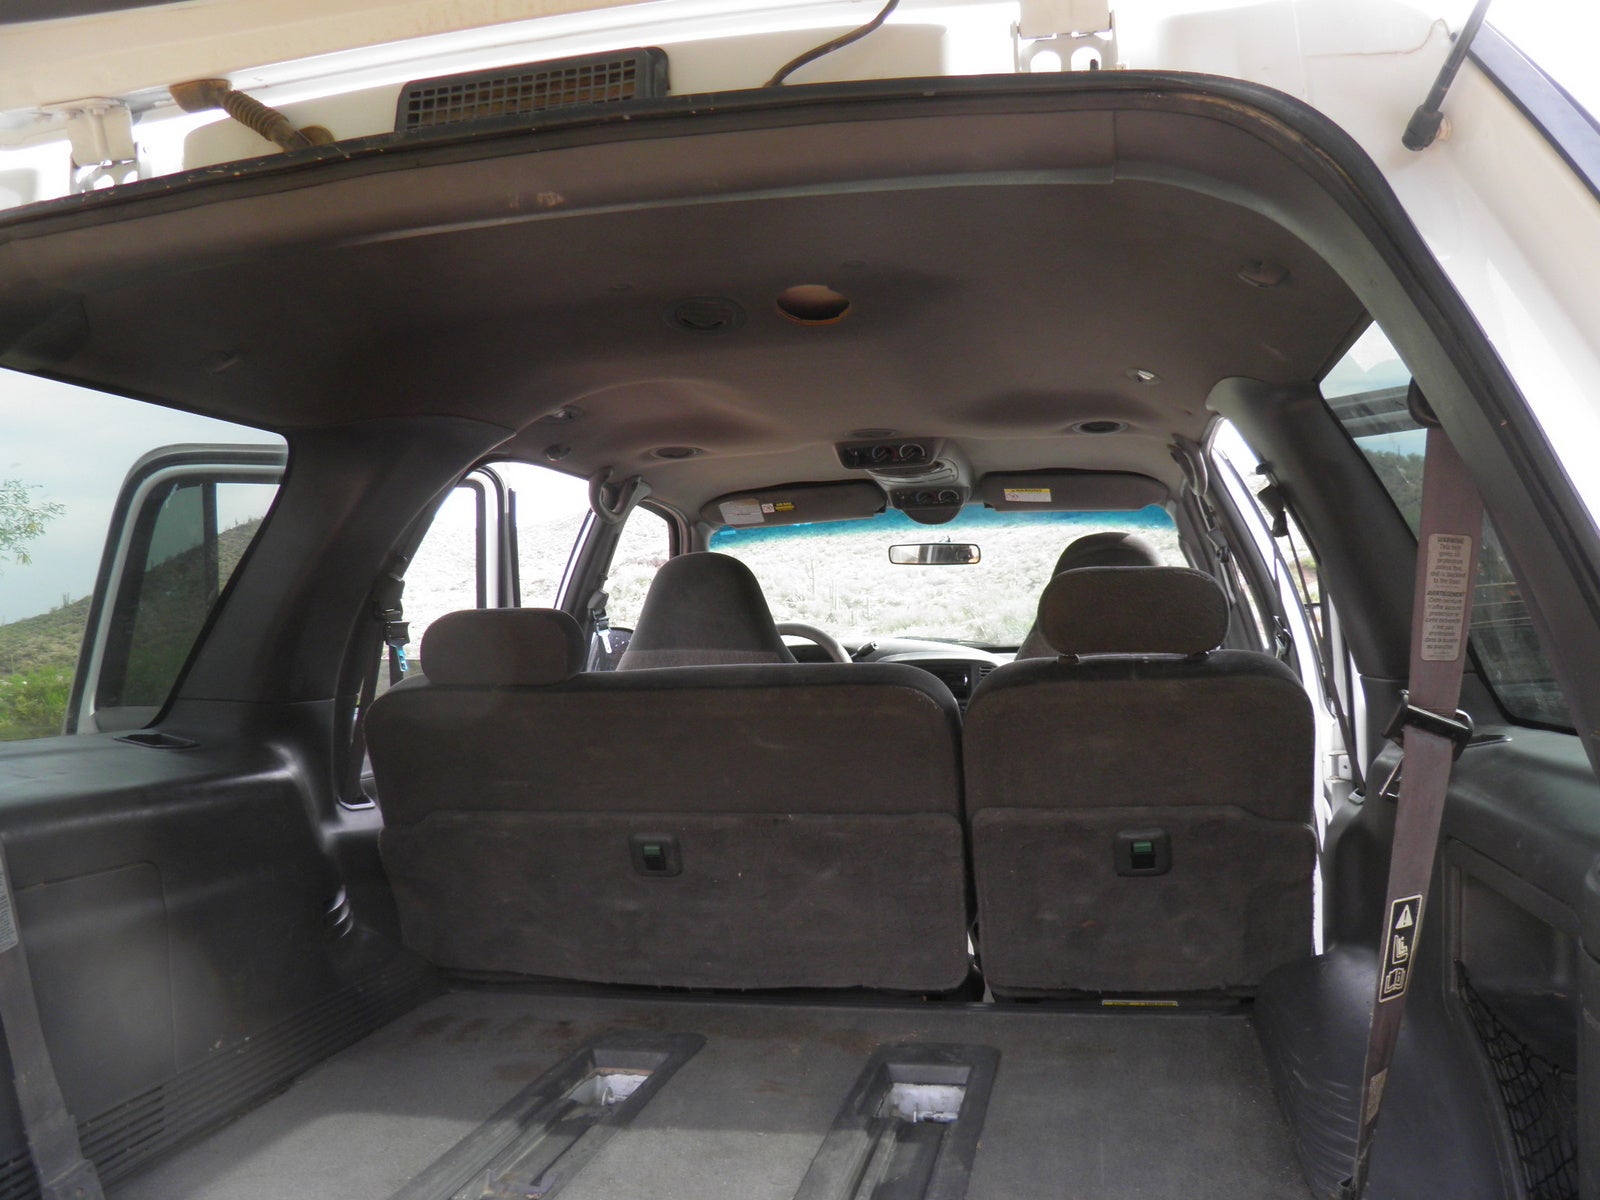 1999 Ford expedition interior dimensions #4